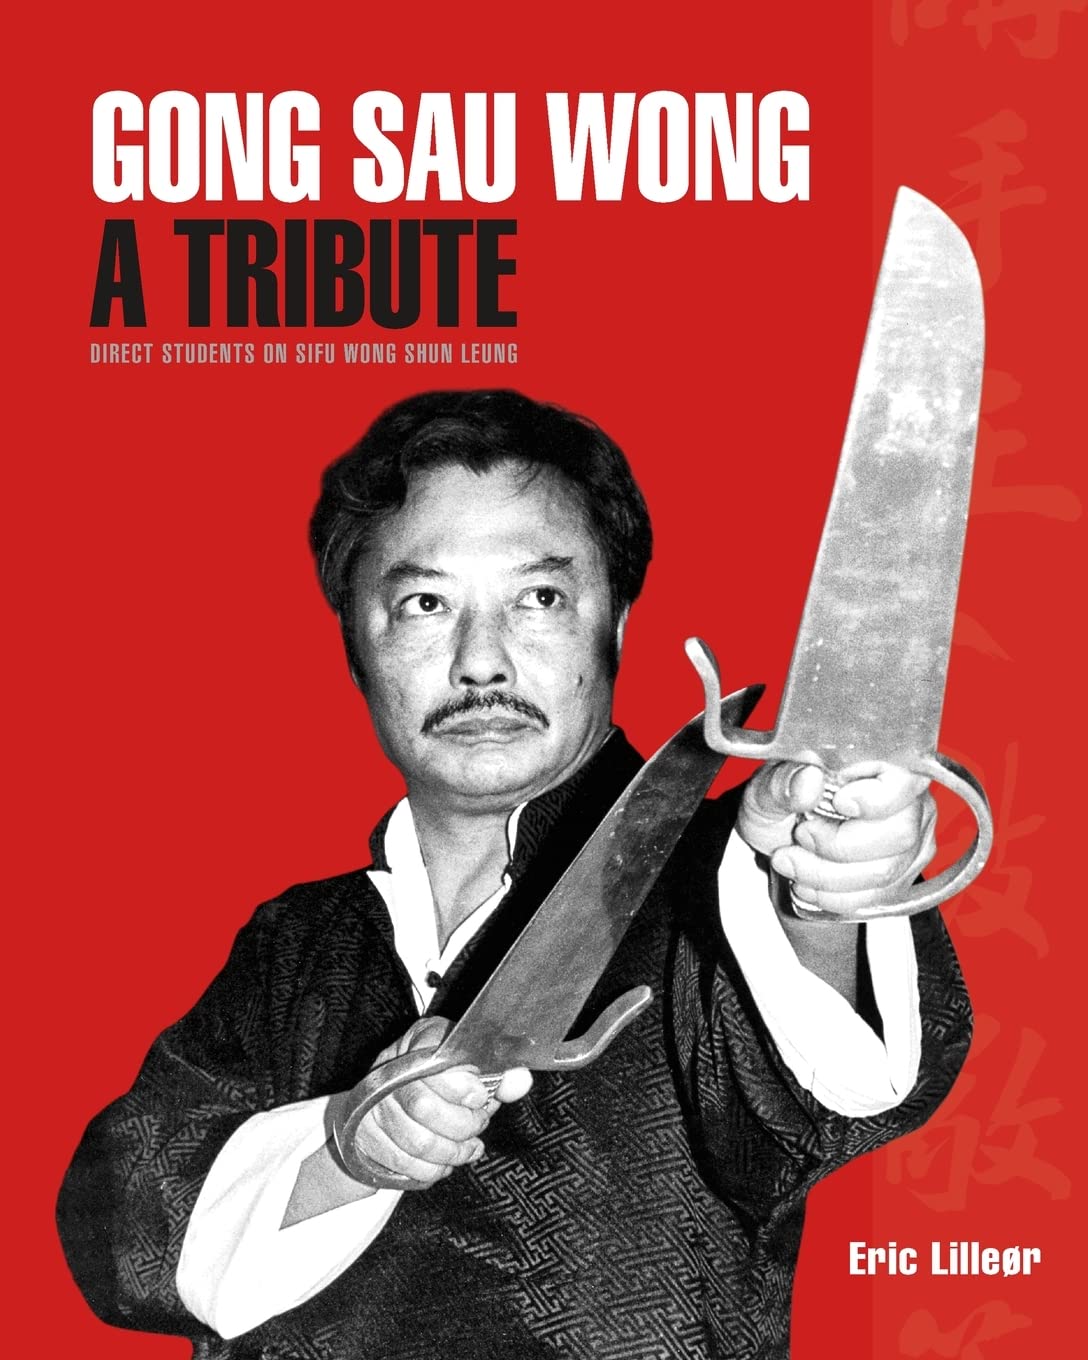 Gong Sau Wong: A Tribute: Direct Students on Sifu Wong Shun Leung Book by Eric Lilleor